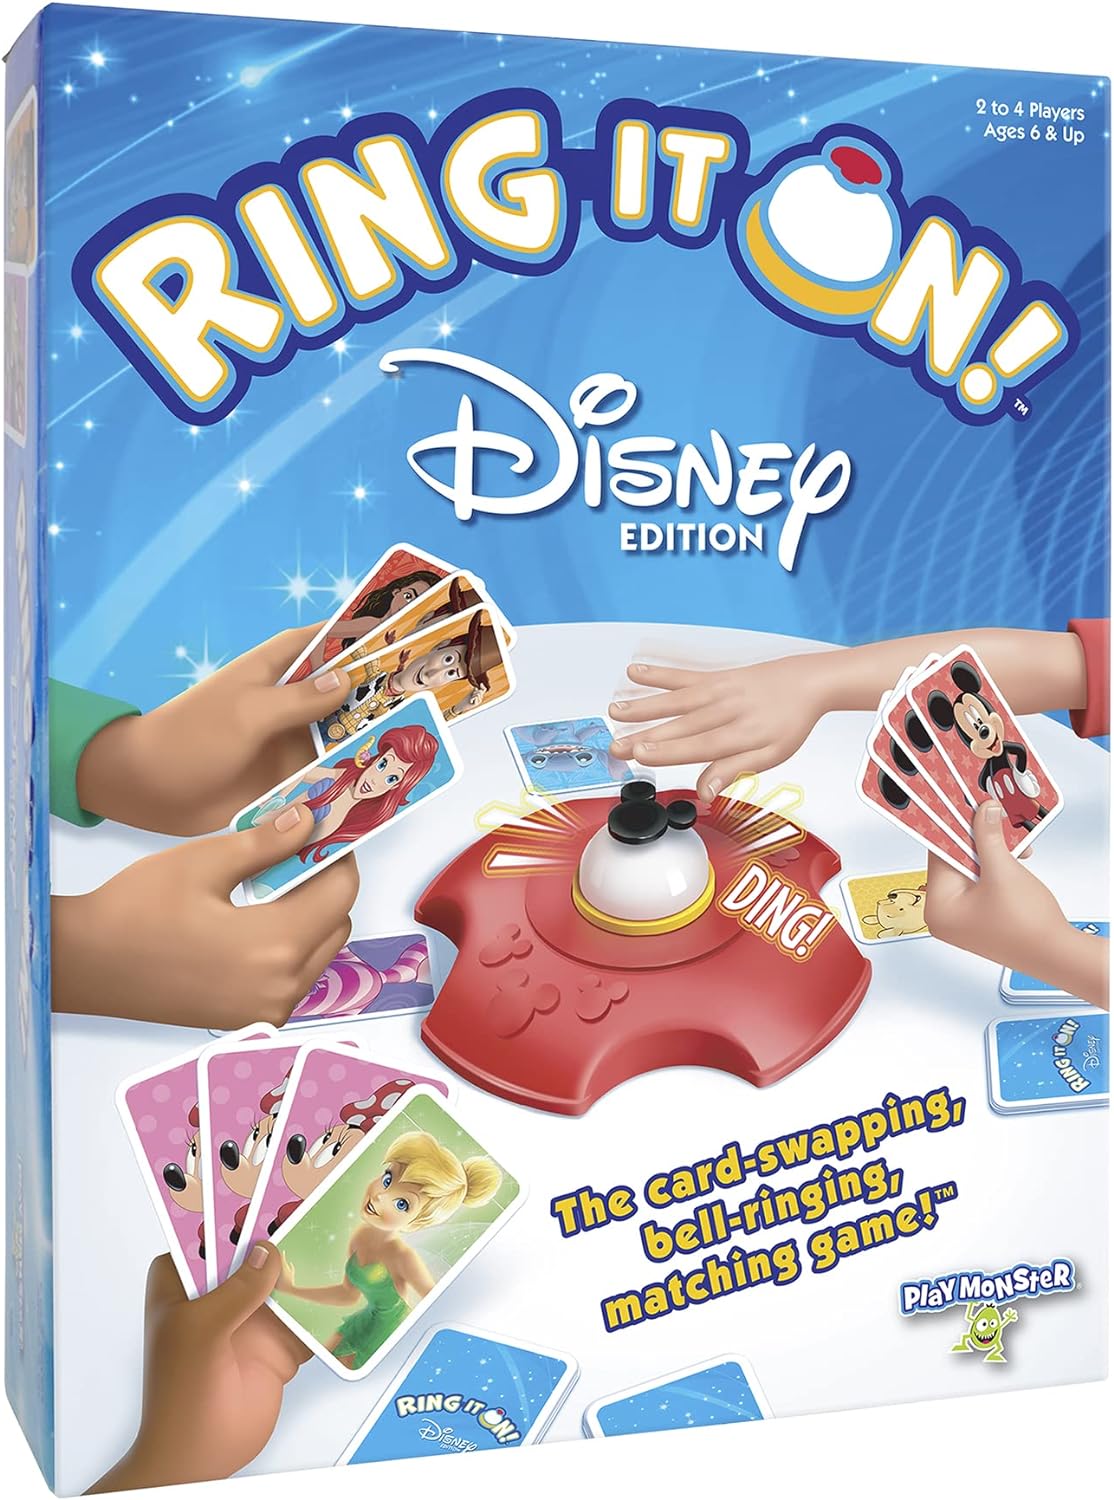 Disney Ring It On! The Card-Swapping, Bell-Ringing, Matching Game!